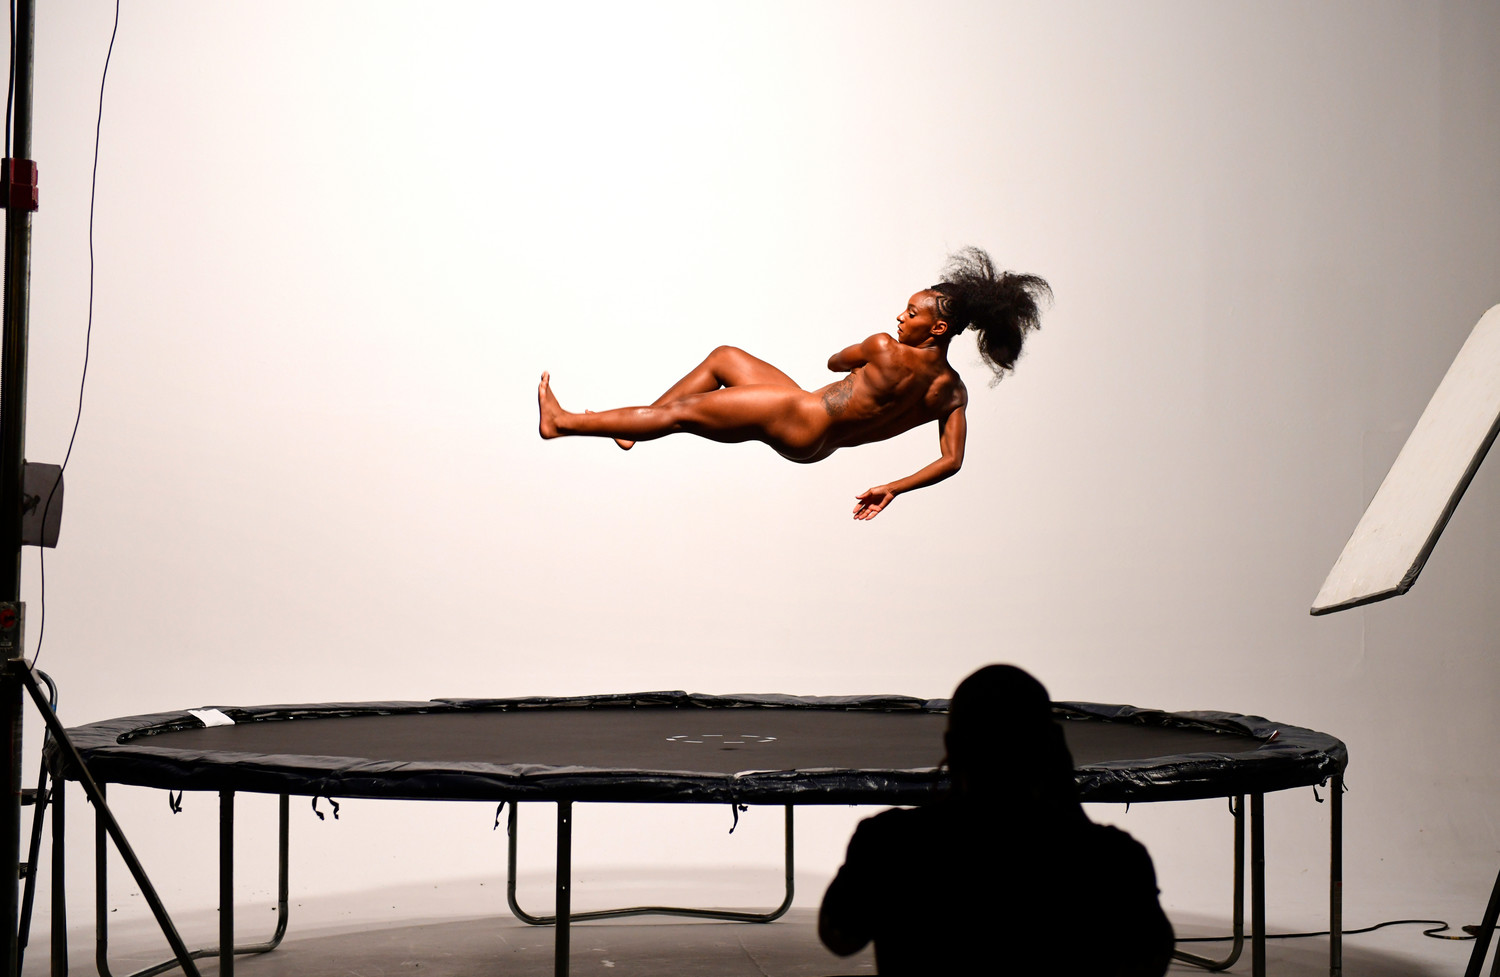 South Side High School alumna and professional soccer player Crystal Dunn took off more than just her cleats as she bounced around during a photo shoot for ESPN the Magazine’s recent 2018 Body Issue.